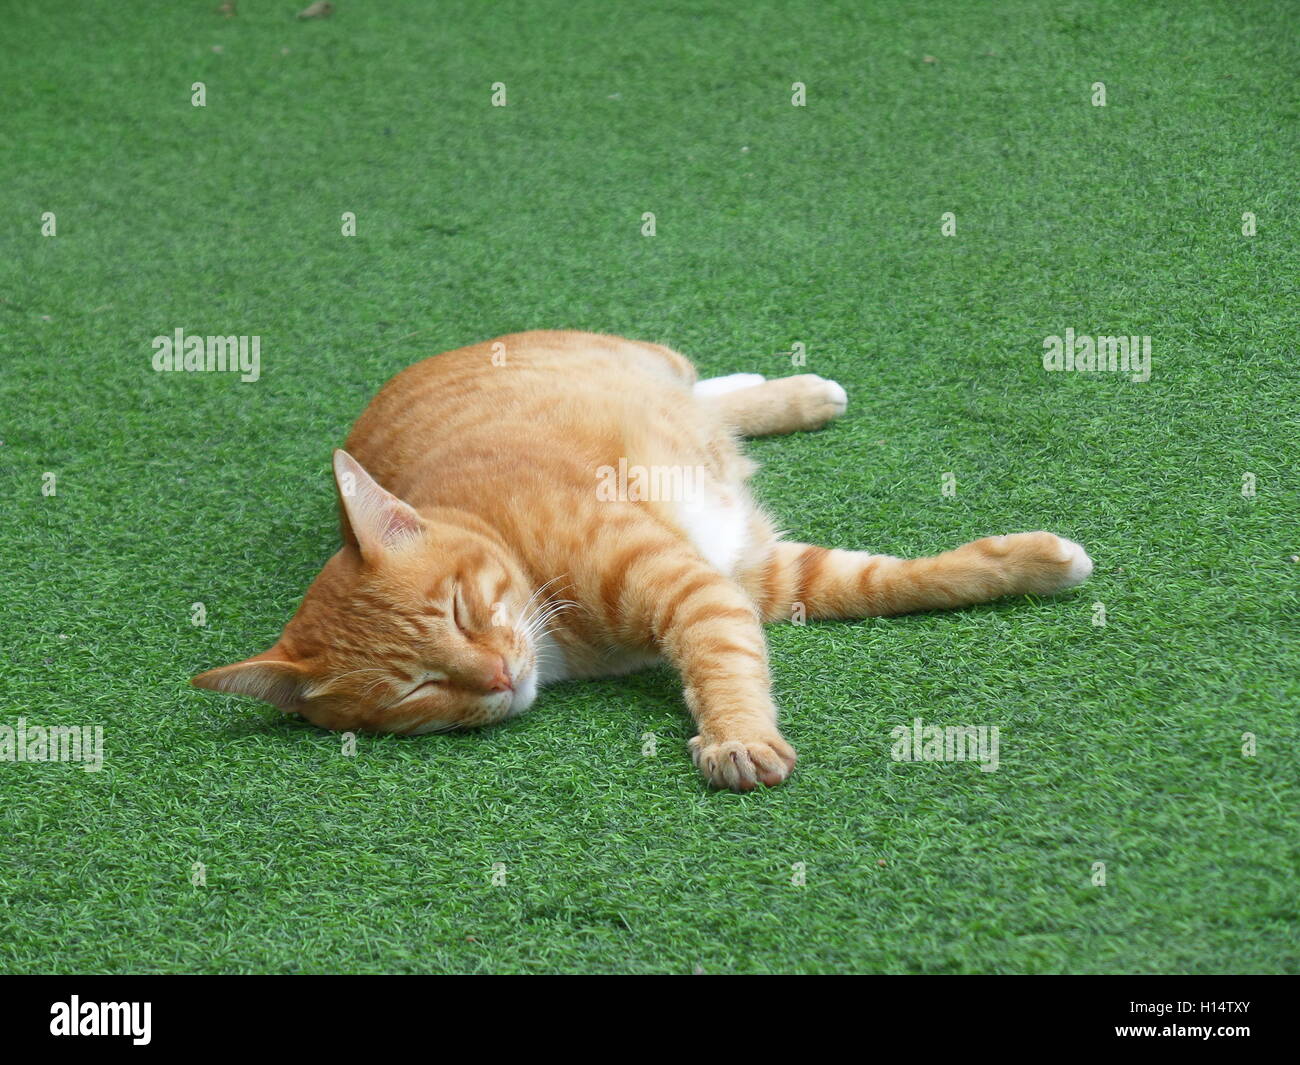 A Brown Cat Taking a Nap on the Green Grass Stock Photo